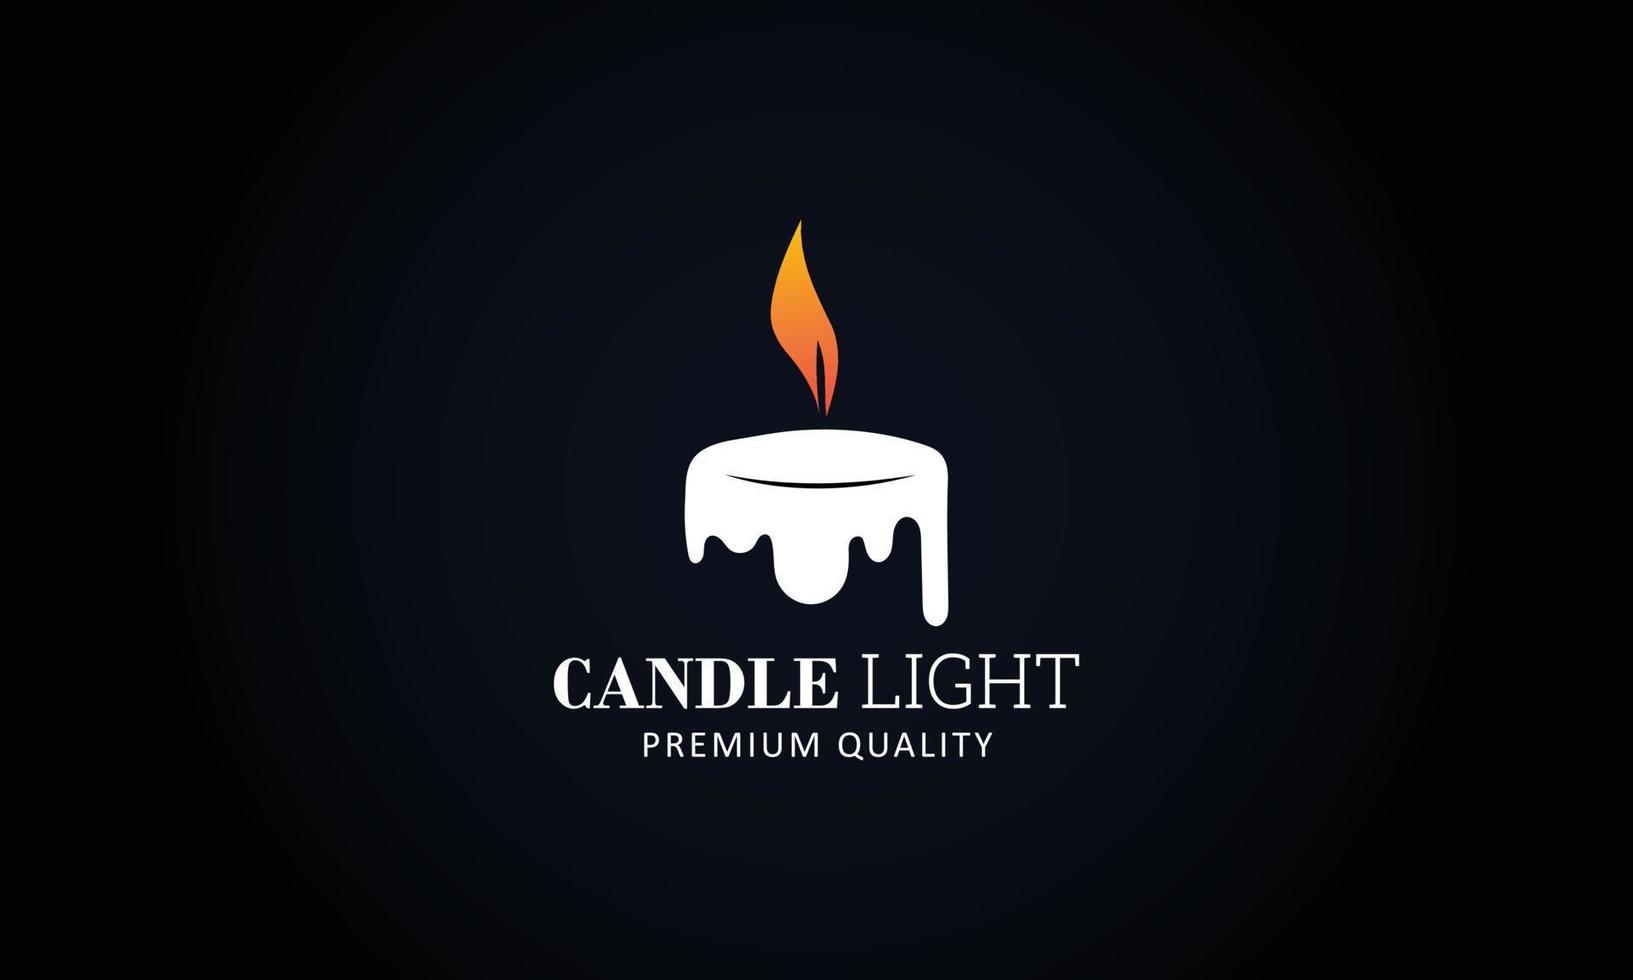 Melted candle logo template vector illustration